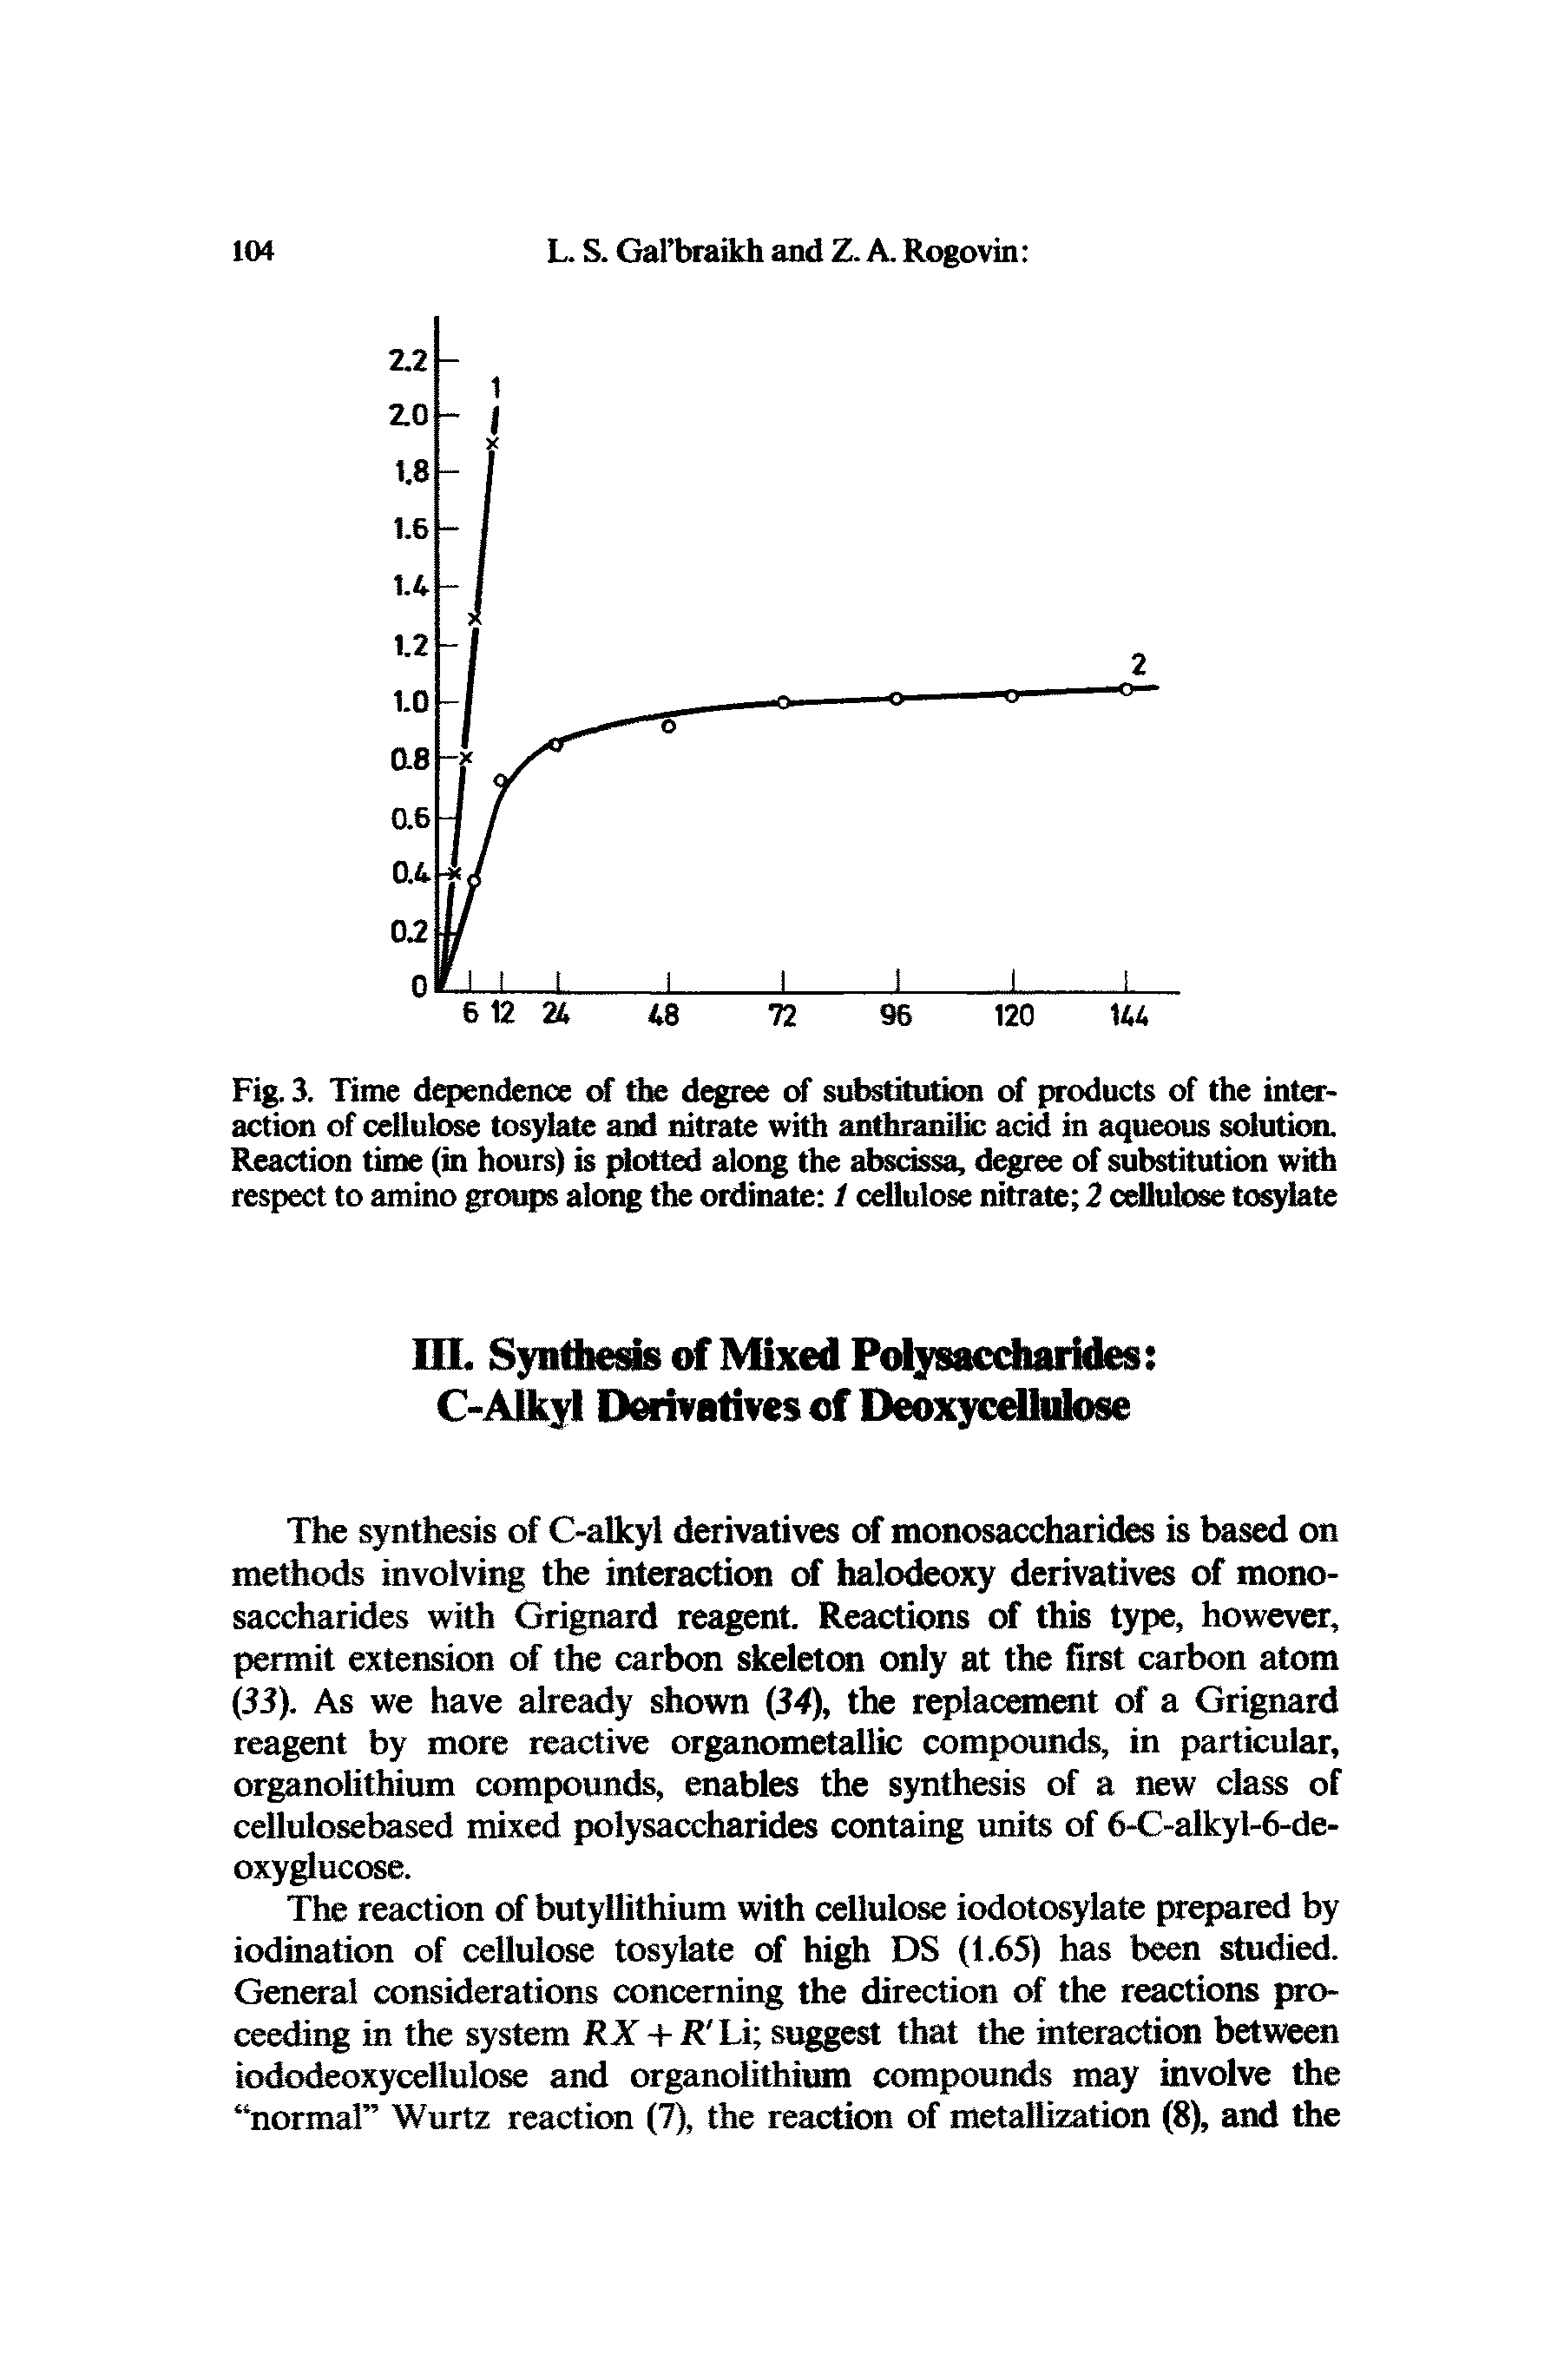 Fig. 3. Time dependence of Hk d ee of substkution of products of the interaction of cellulose tosylate and nitrate with anthranilk acid in aqueous solutioa Reaction time (in hours) is dotted along the abscissa, degree of substitution with respect to amino groiqps along the ordinate 1 cellulose nitrate 2 cellulose tc date...